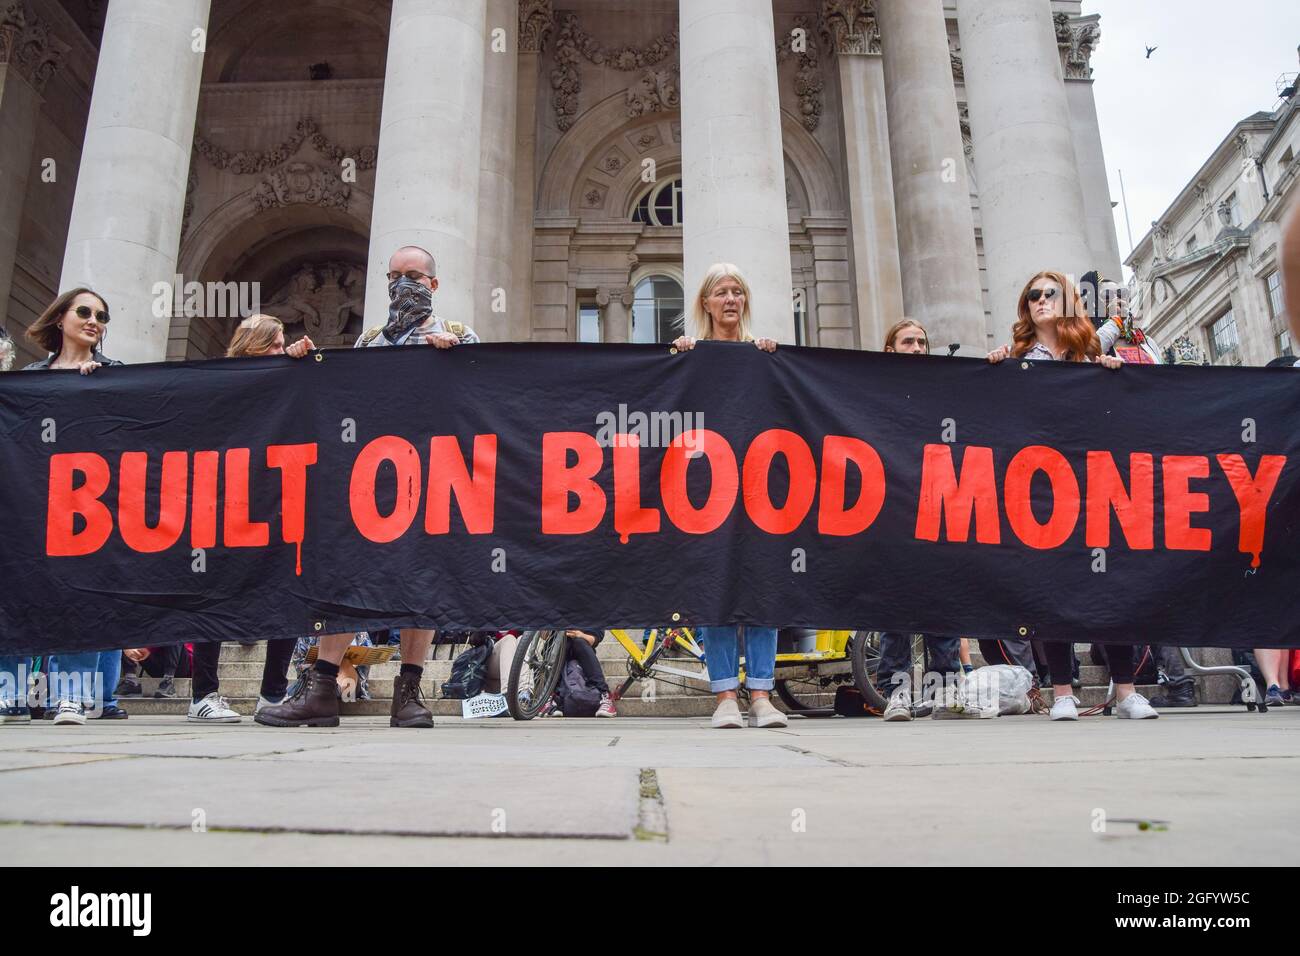 London, United Kingdom. 27th August 2021. Extinction Rebellion protesters outside The Royal Exchange, part of their Blood Money March targeting the City of London. (Credit: Vuk Valcic / Alamy Live News) Stock Photo